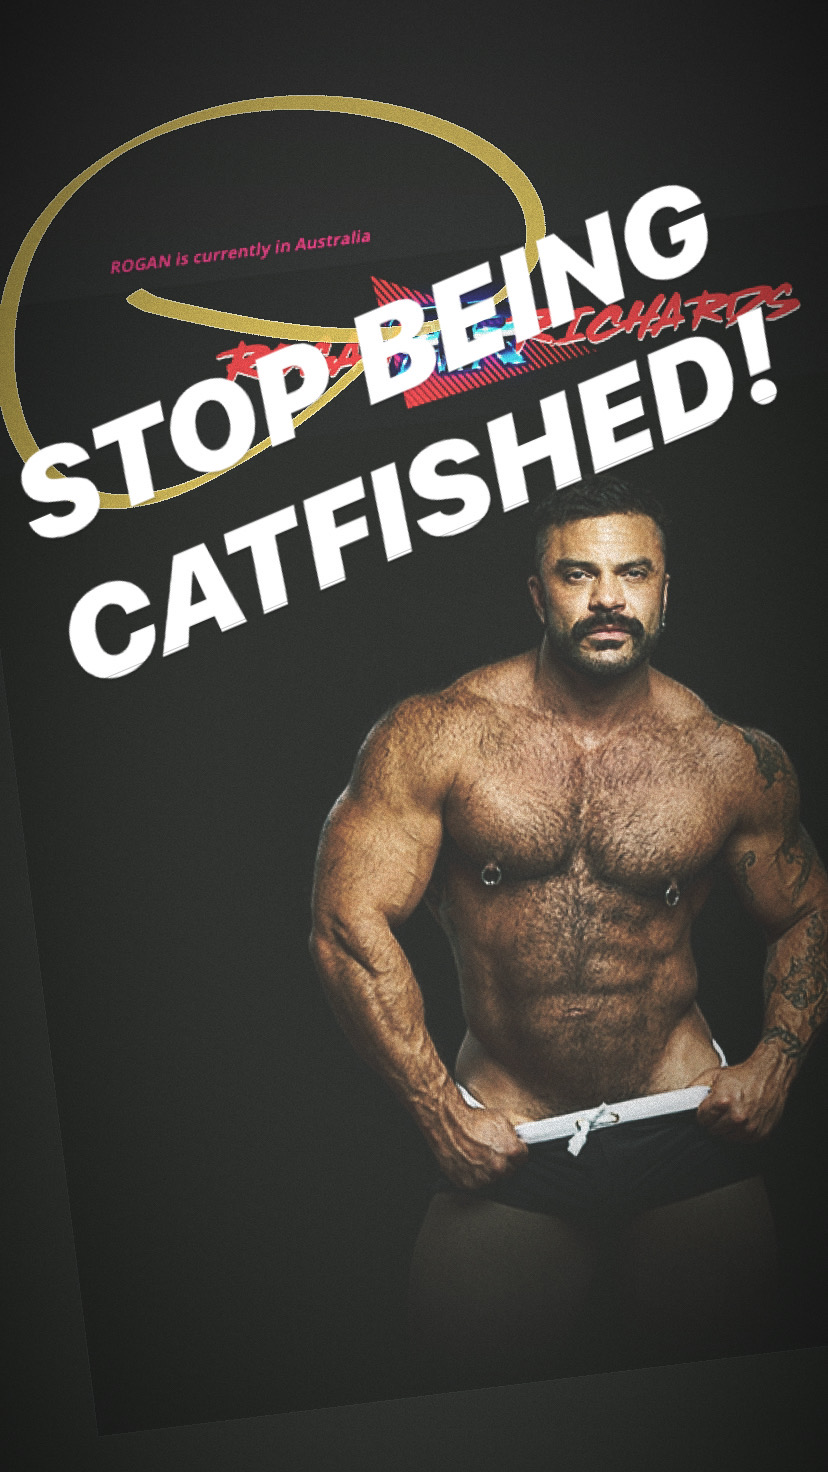 DON’T BE CATFISHED!